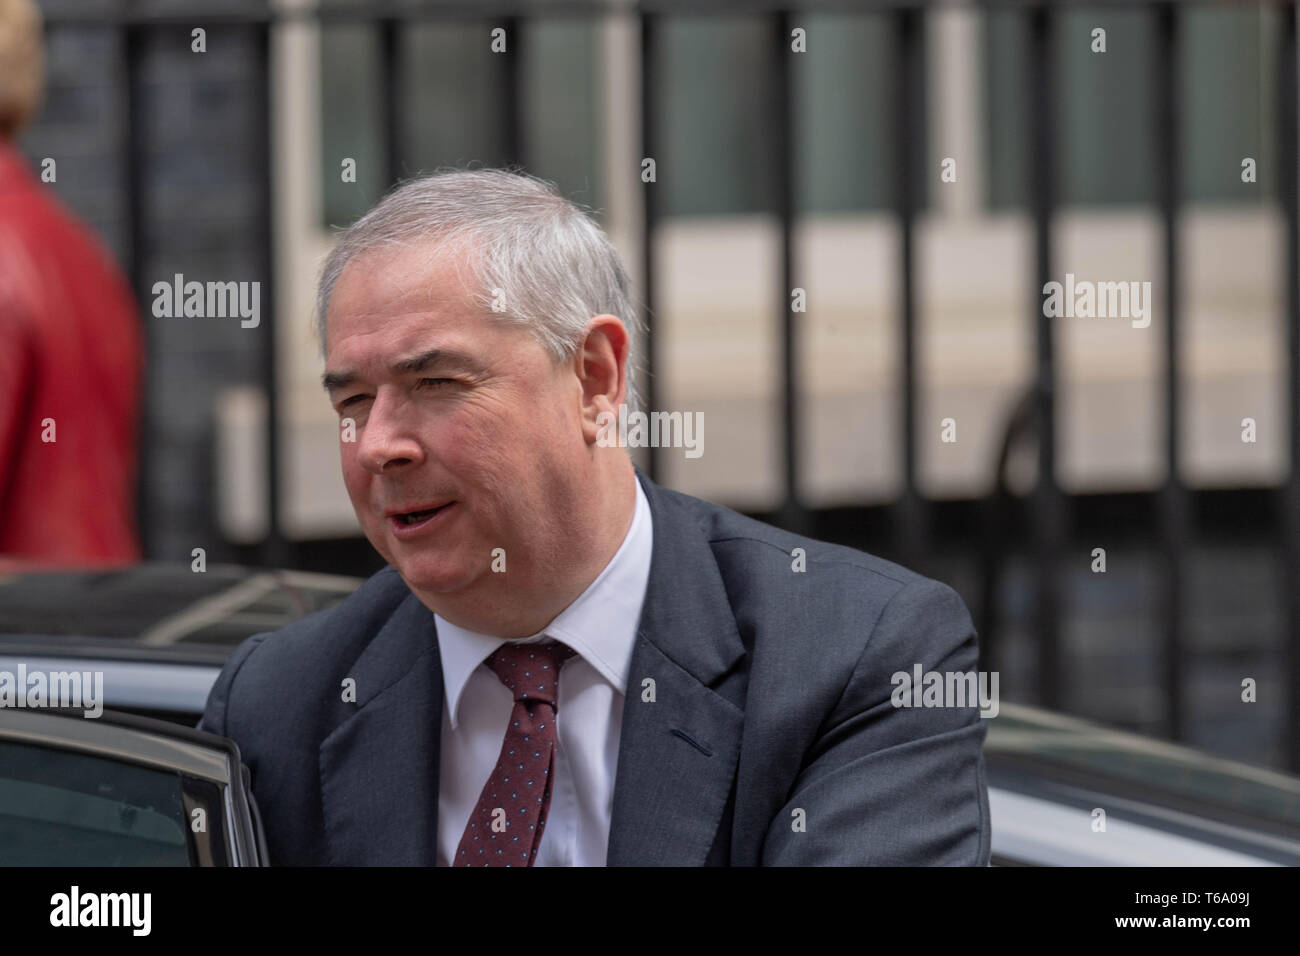 London 30th April 2019, Geoffrey Cox QC MP arrives at a Cabinet meeting at 10 Downing Street, London Credit: Ian Davidson/Alamy Live News Stock Photo